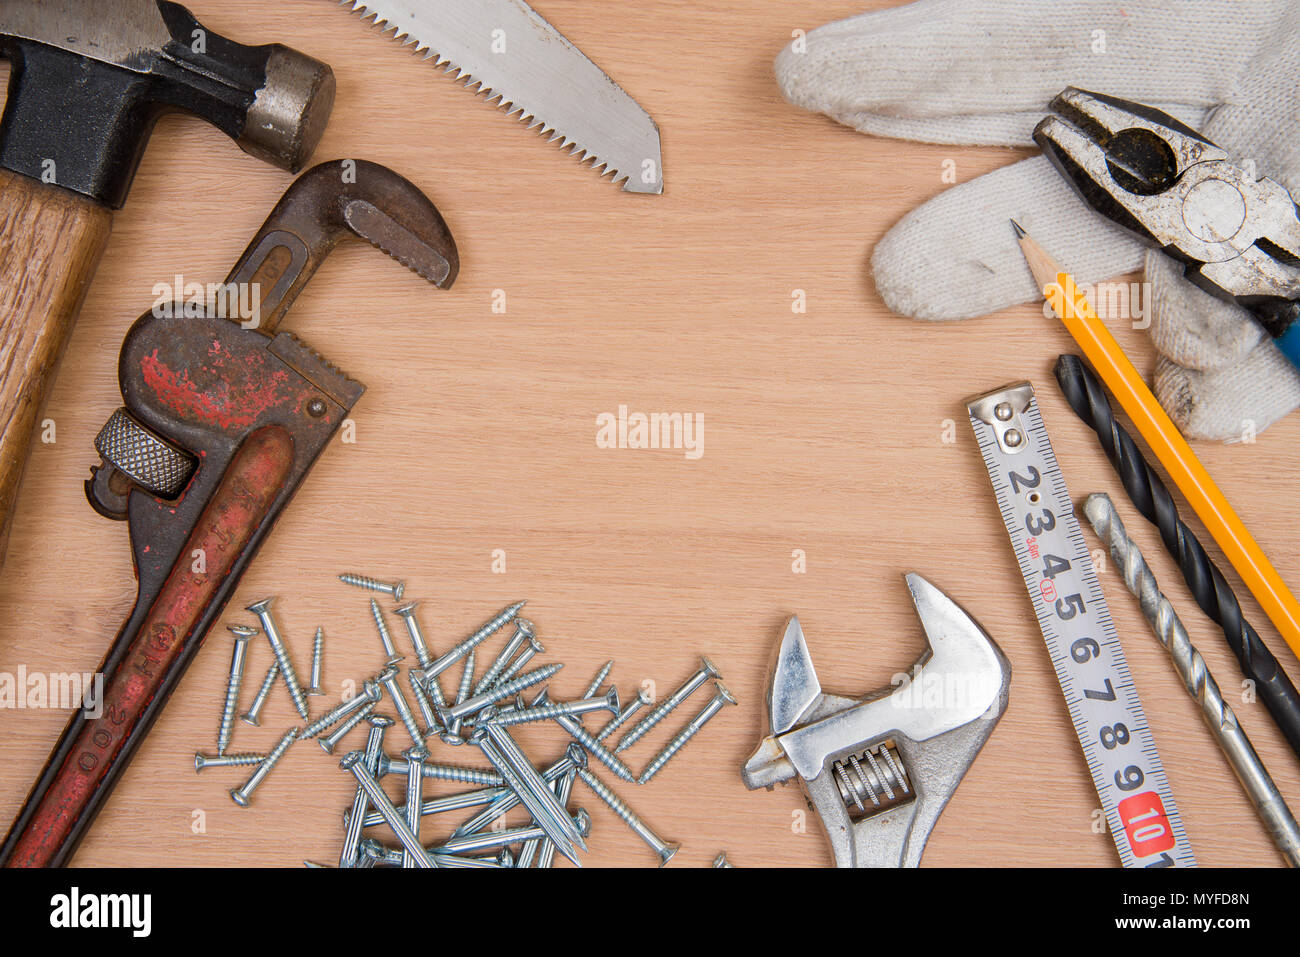 Construction Tools On Wooden Desk Stock Photo